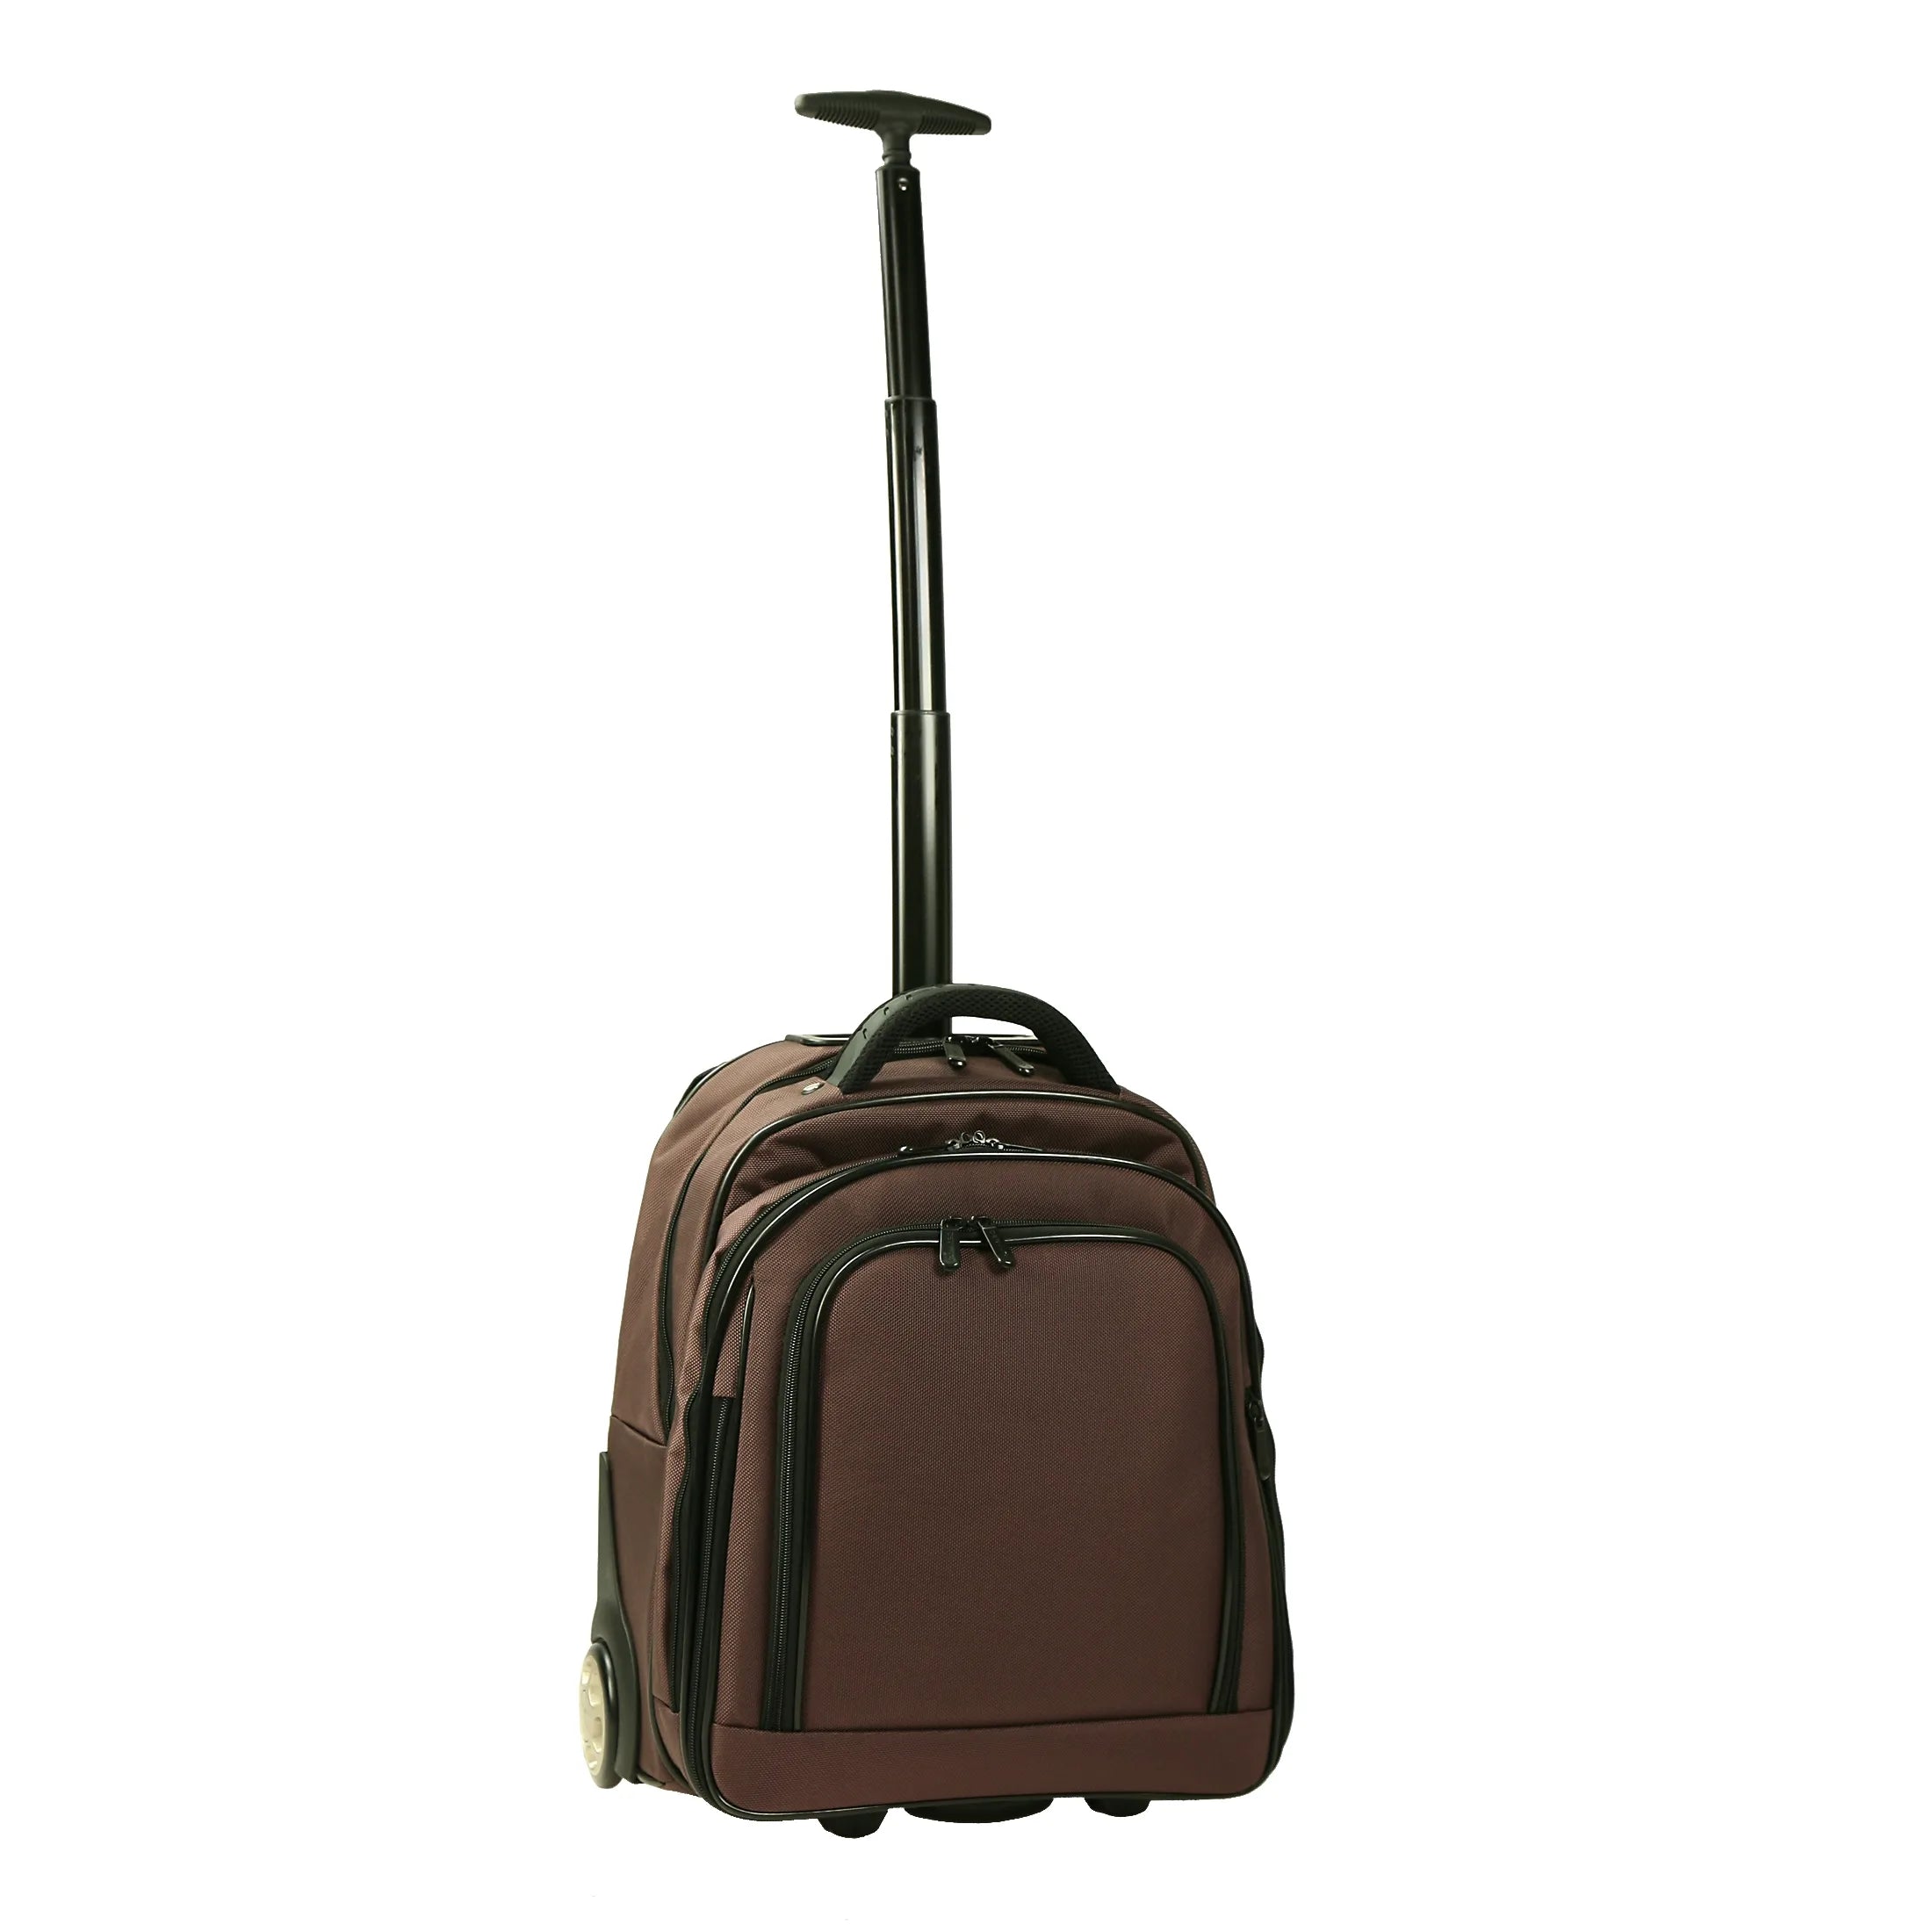 Dermata Business Mobile Office with backpack function - brown